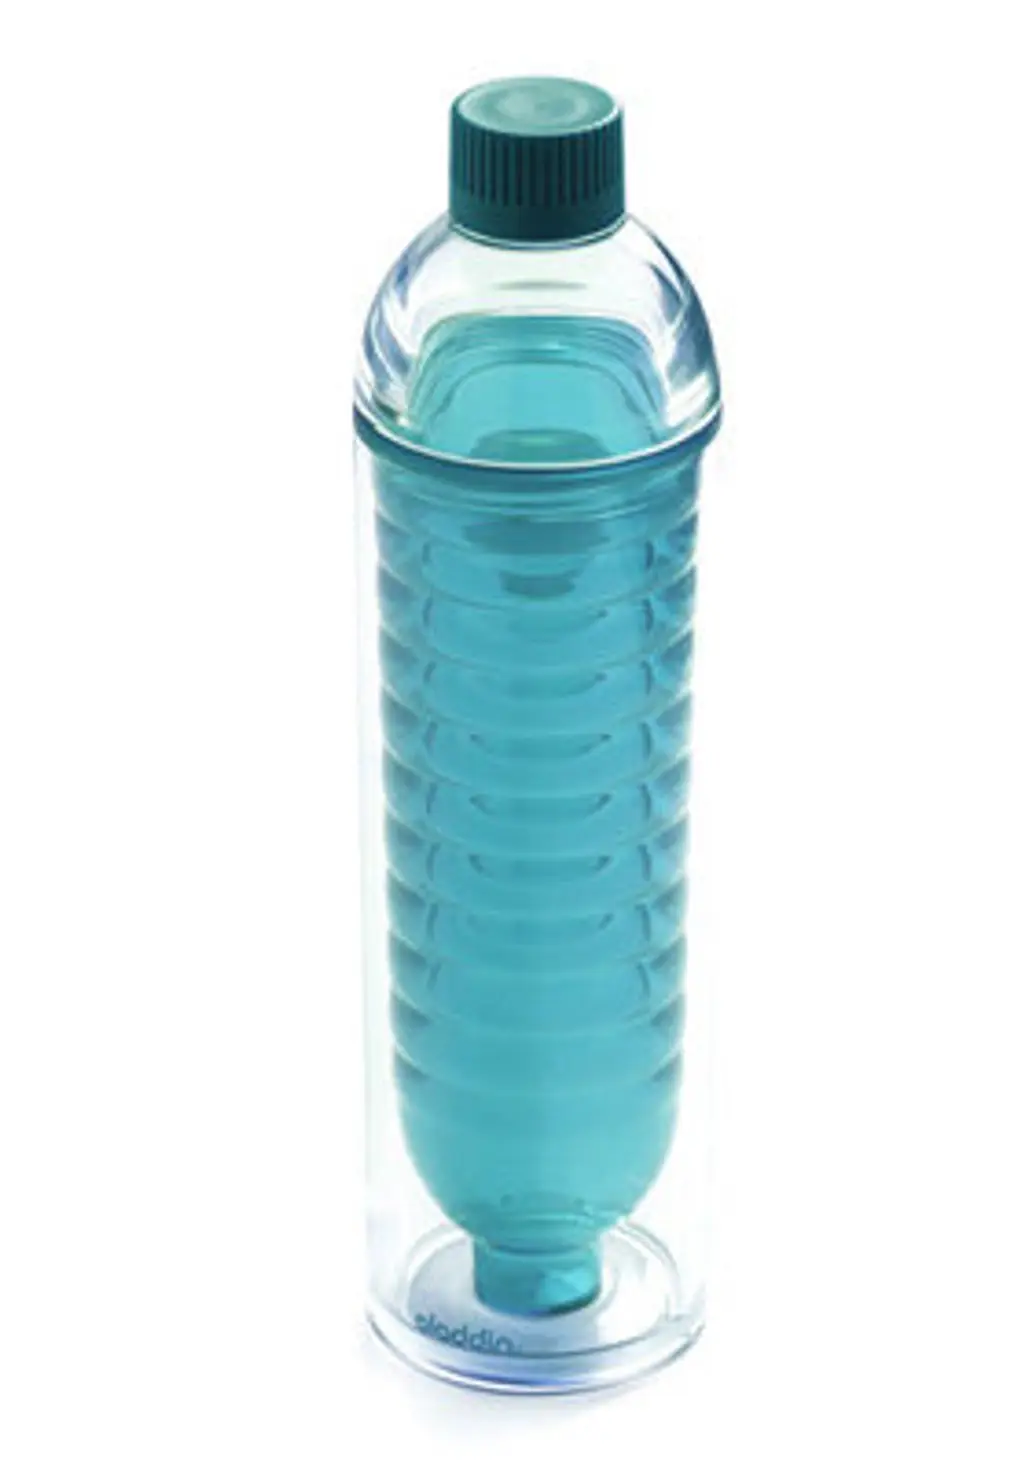 Let's Chill Re-Useable Bottle